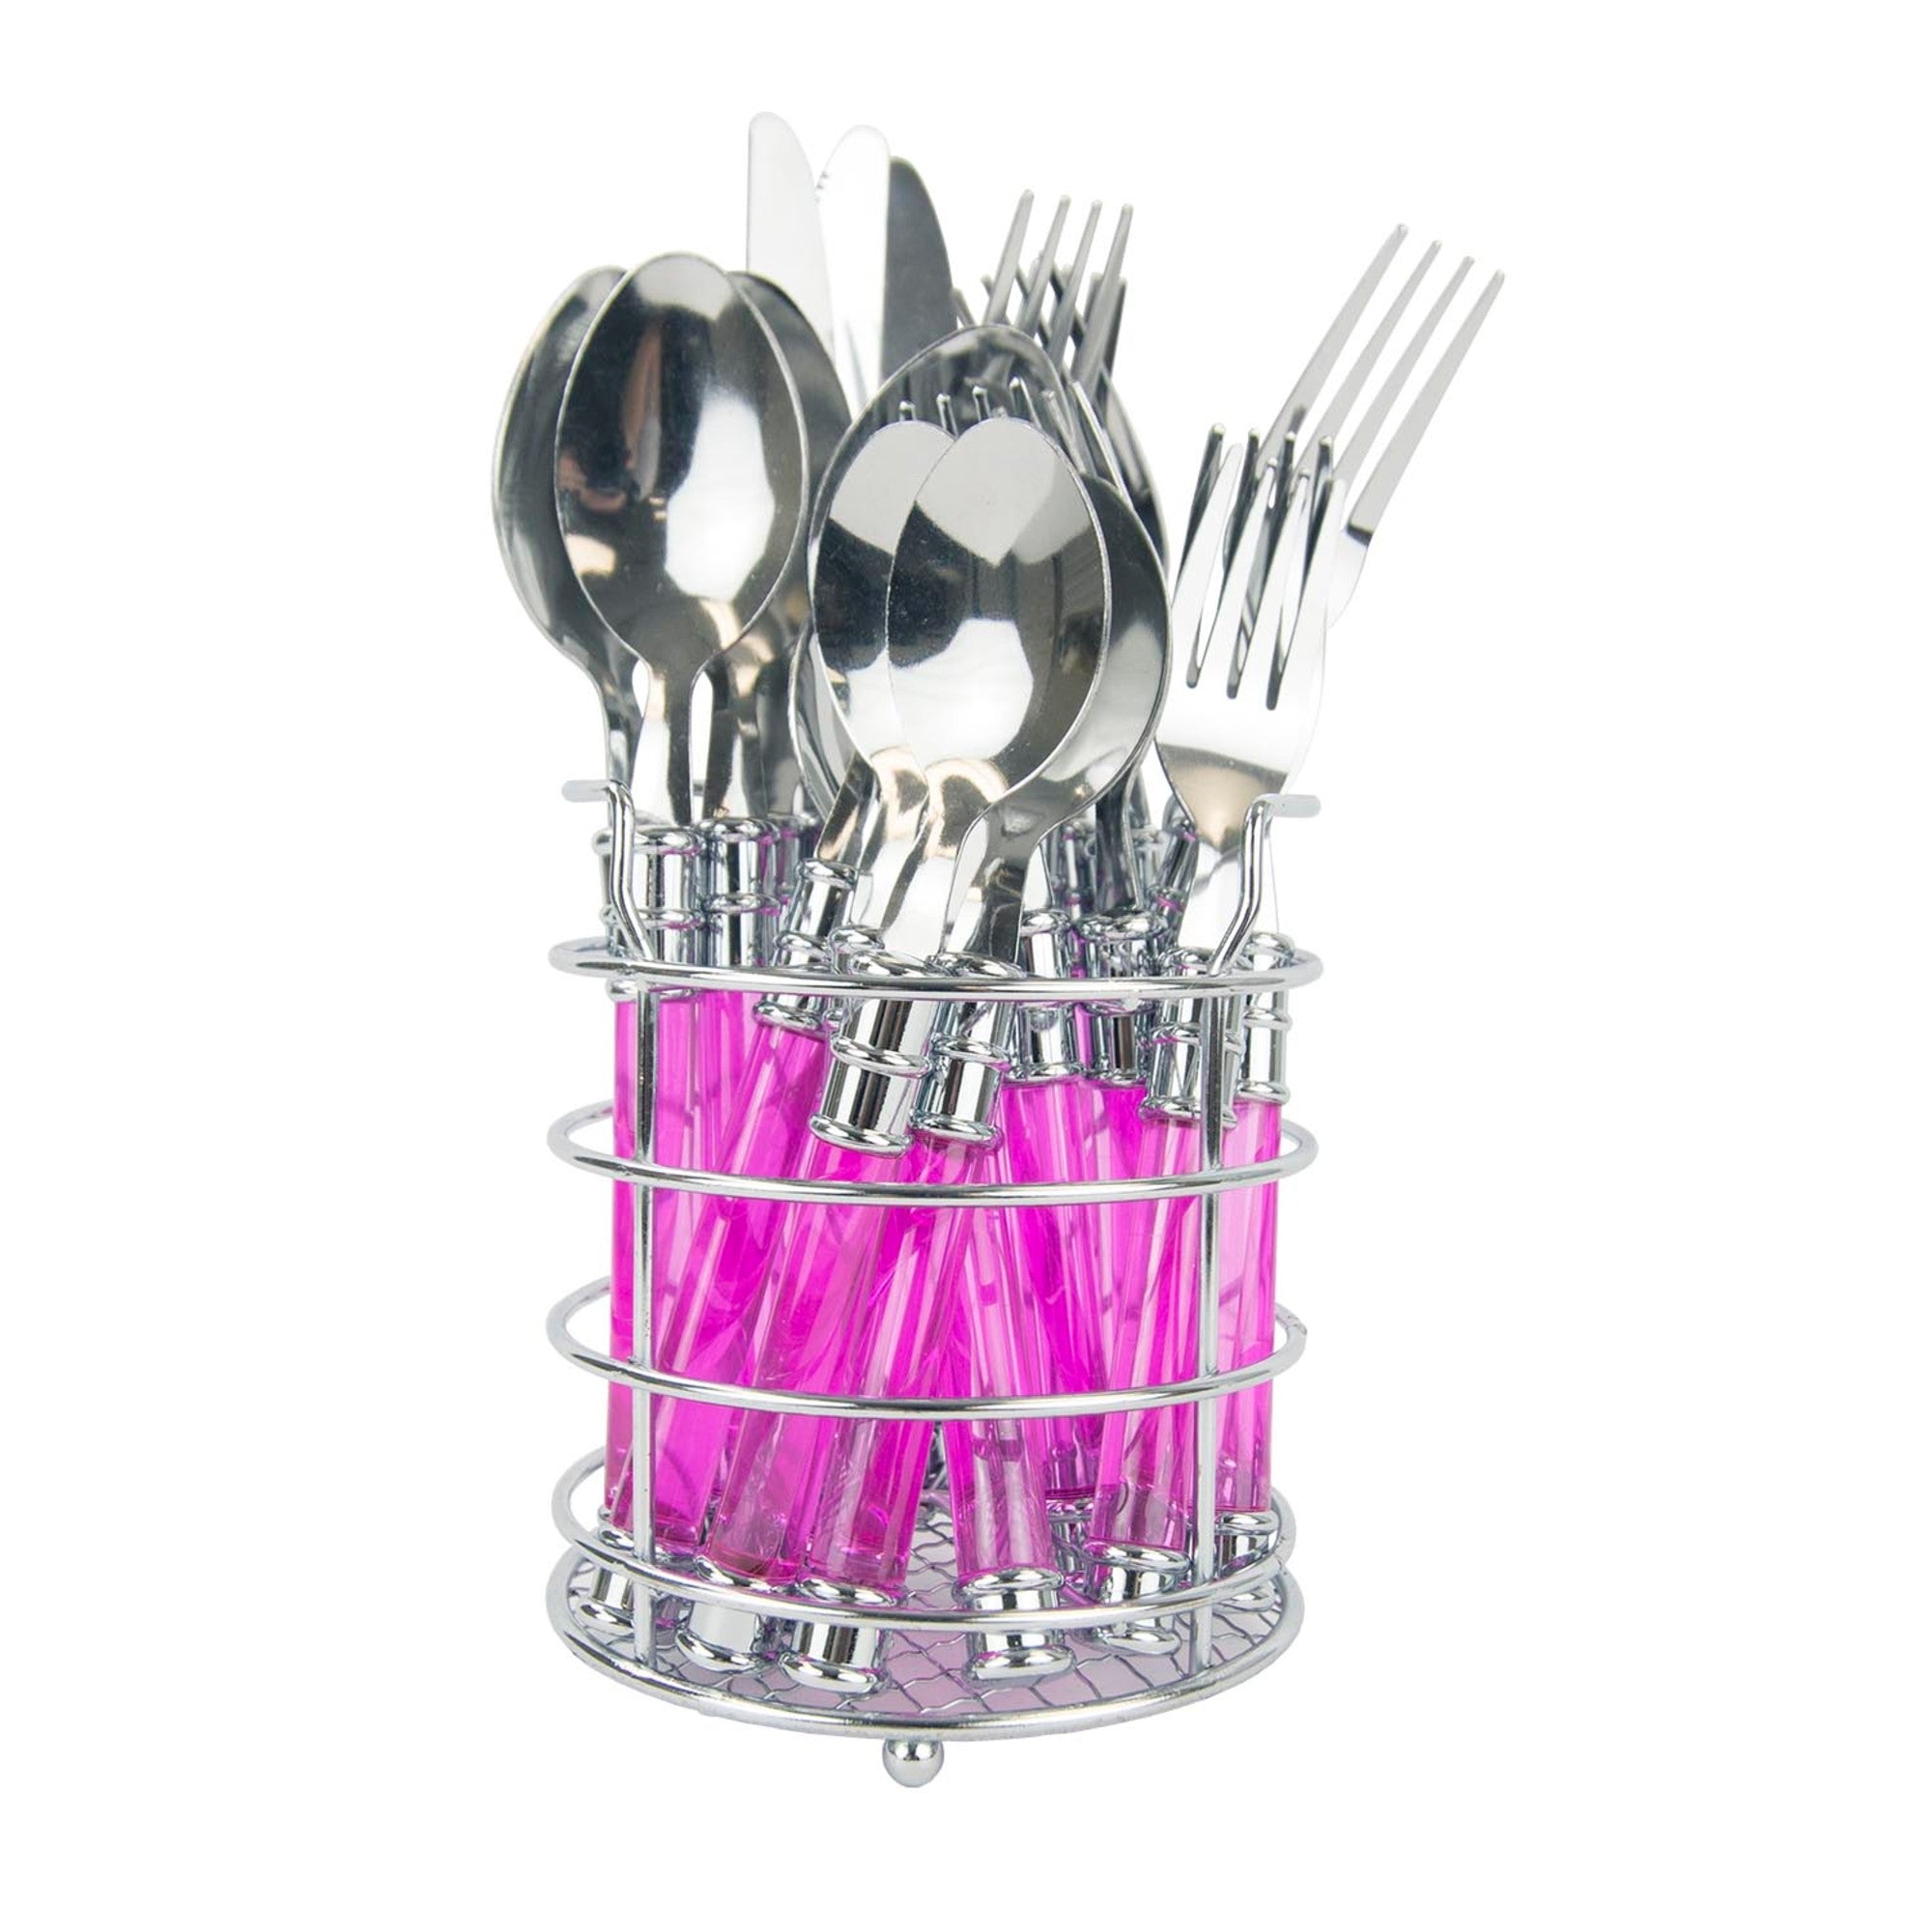 Utensil Caddy and Tool Set – Country Cute Shop